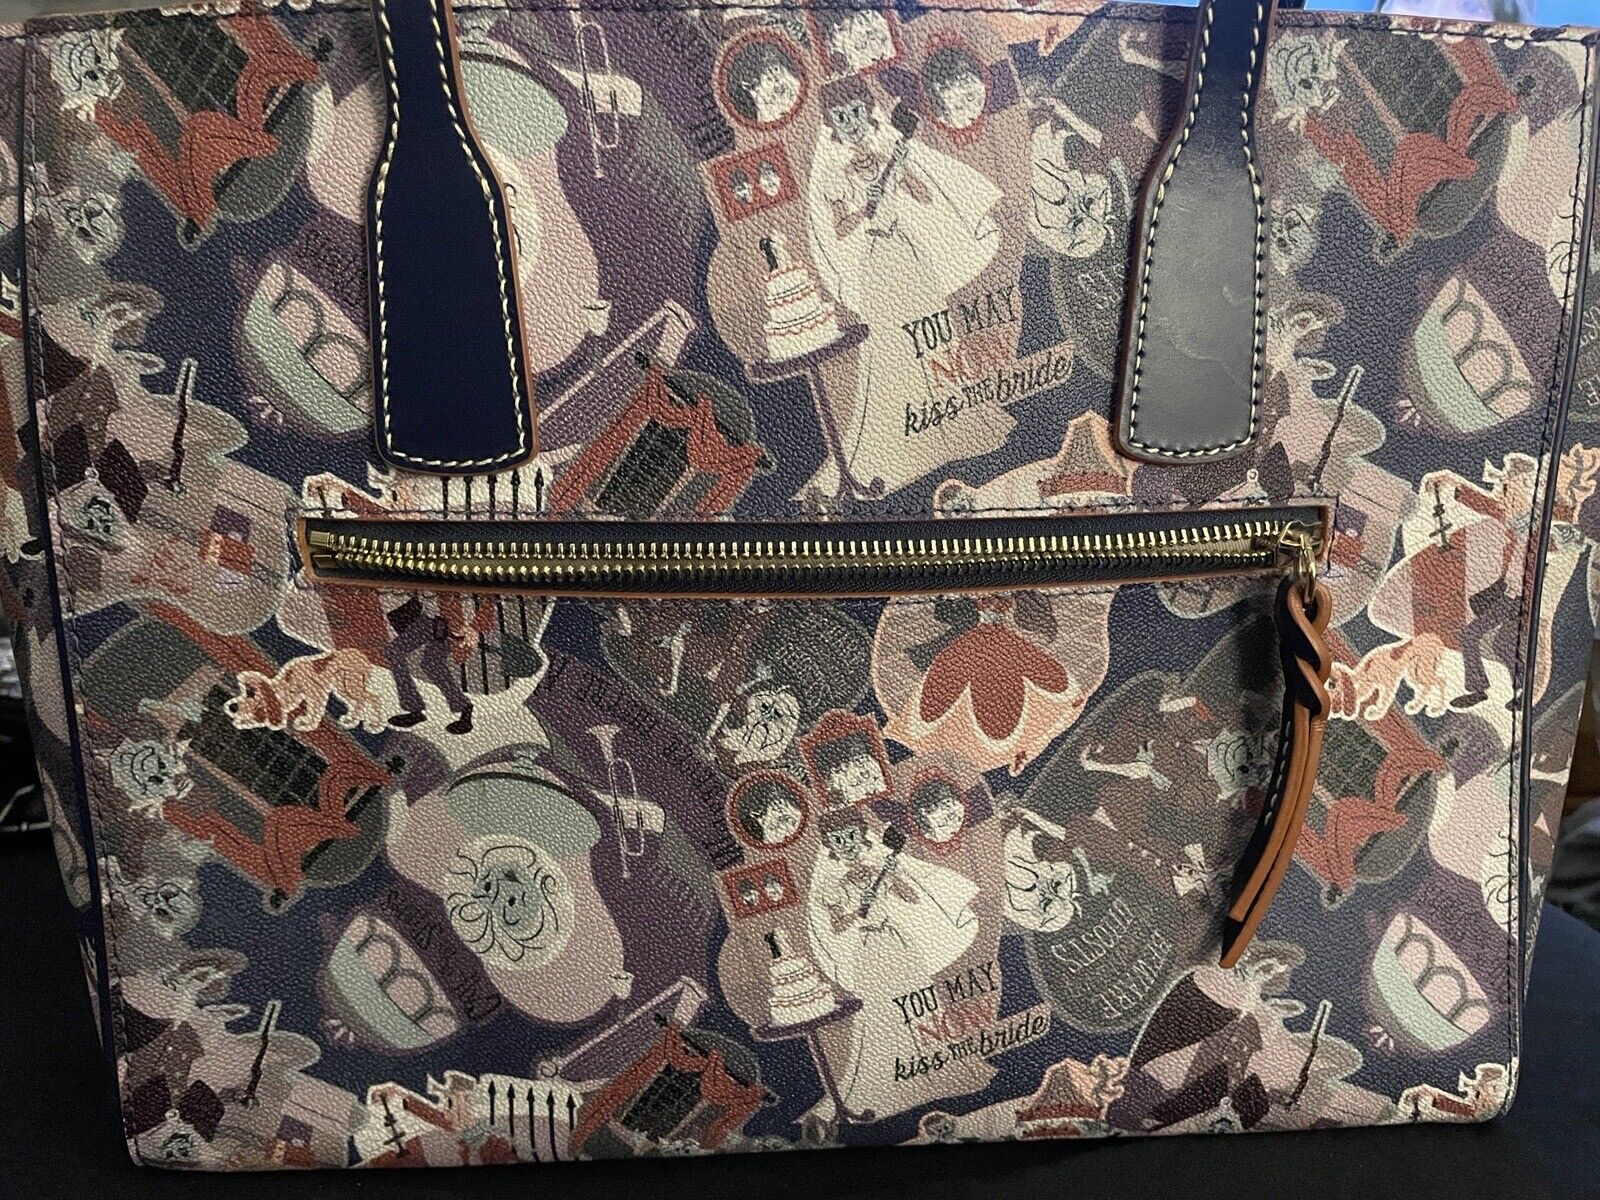 Dooney and Bourke Disney Haunted Mansion large tote purse bag And Wallet